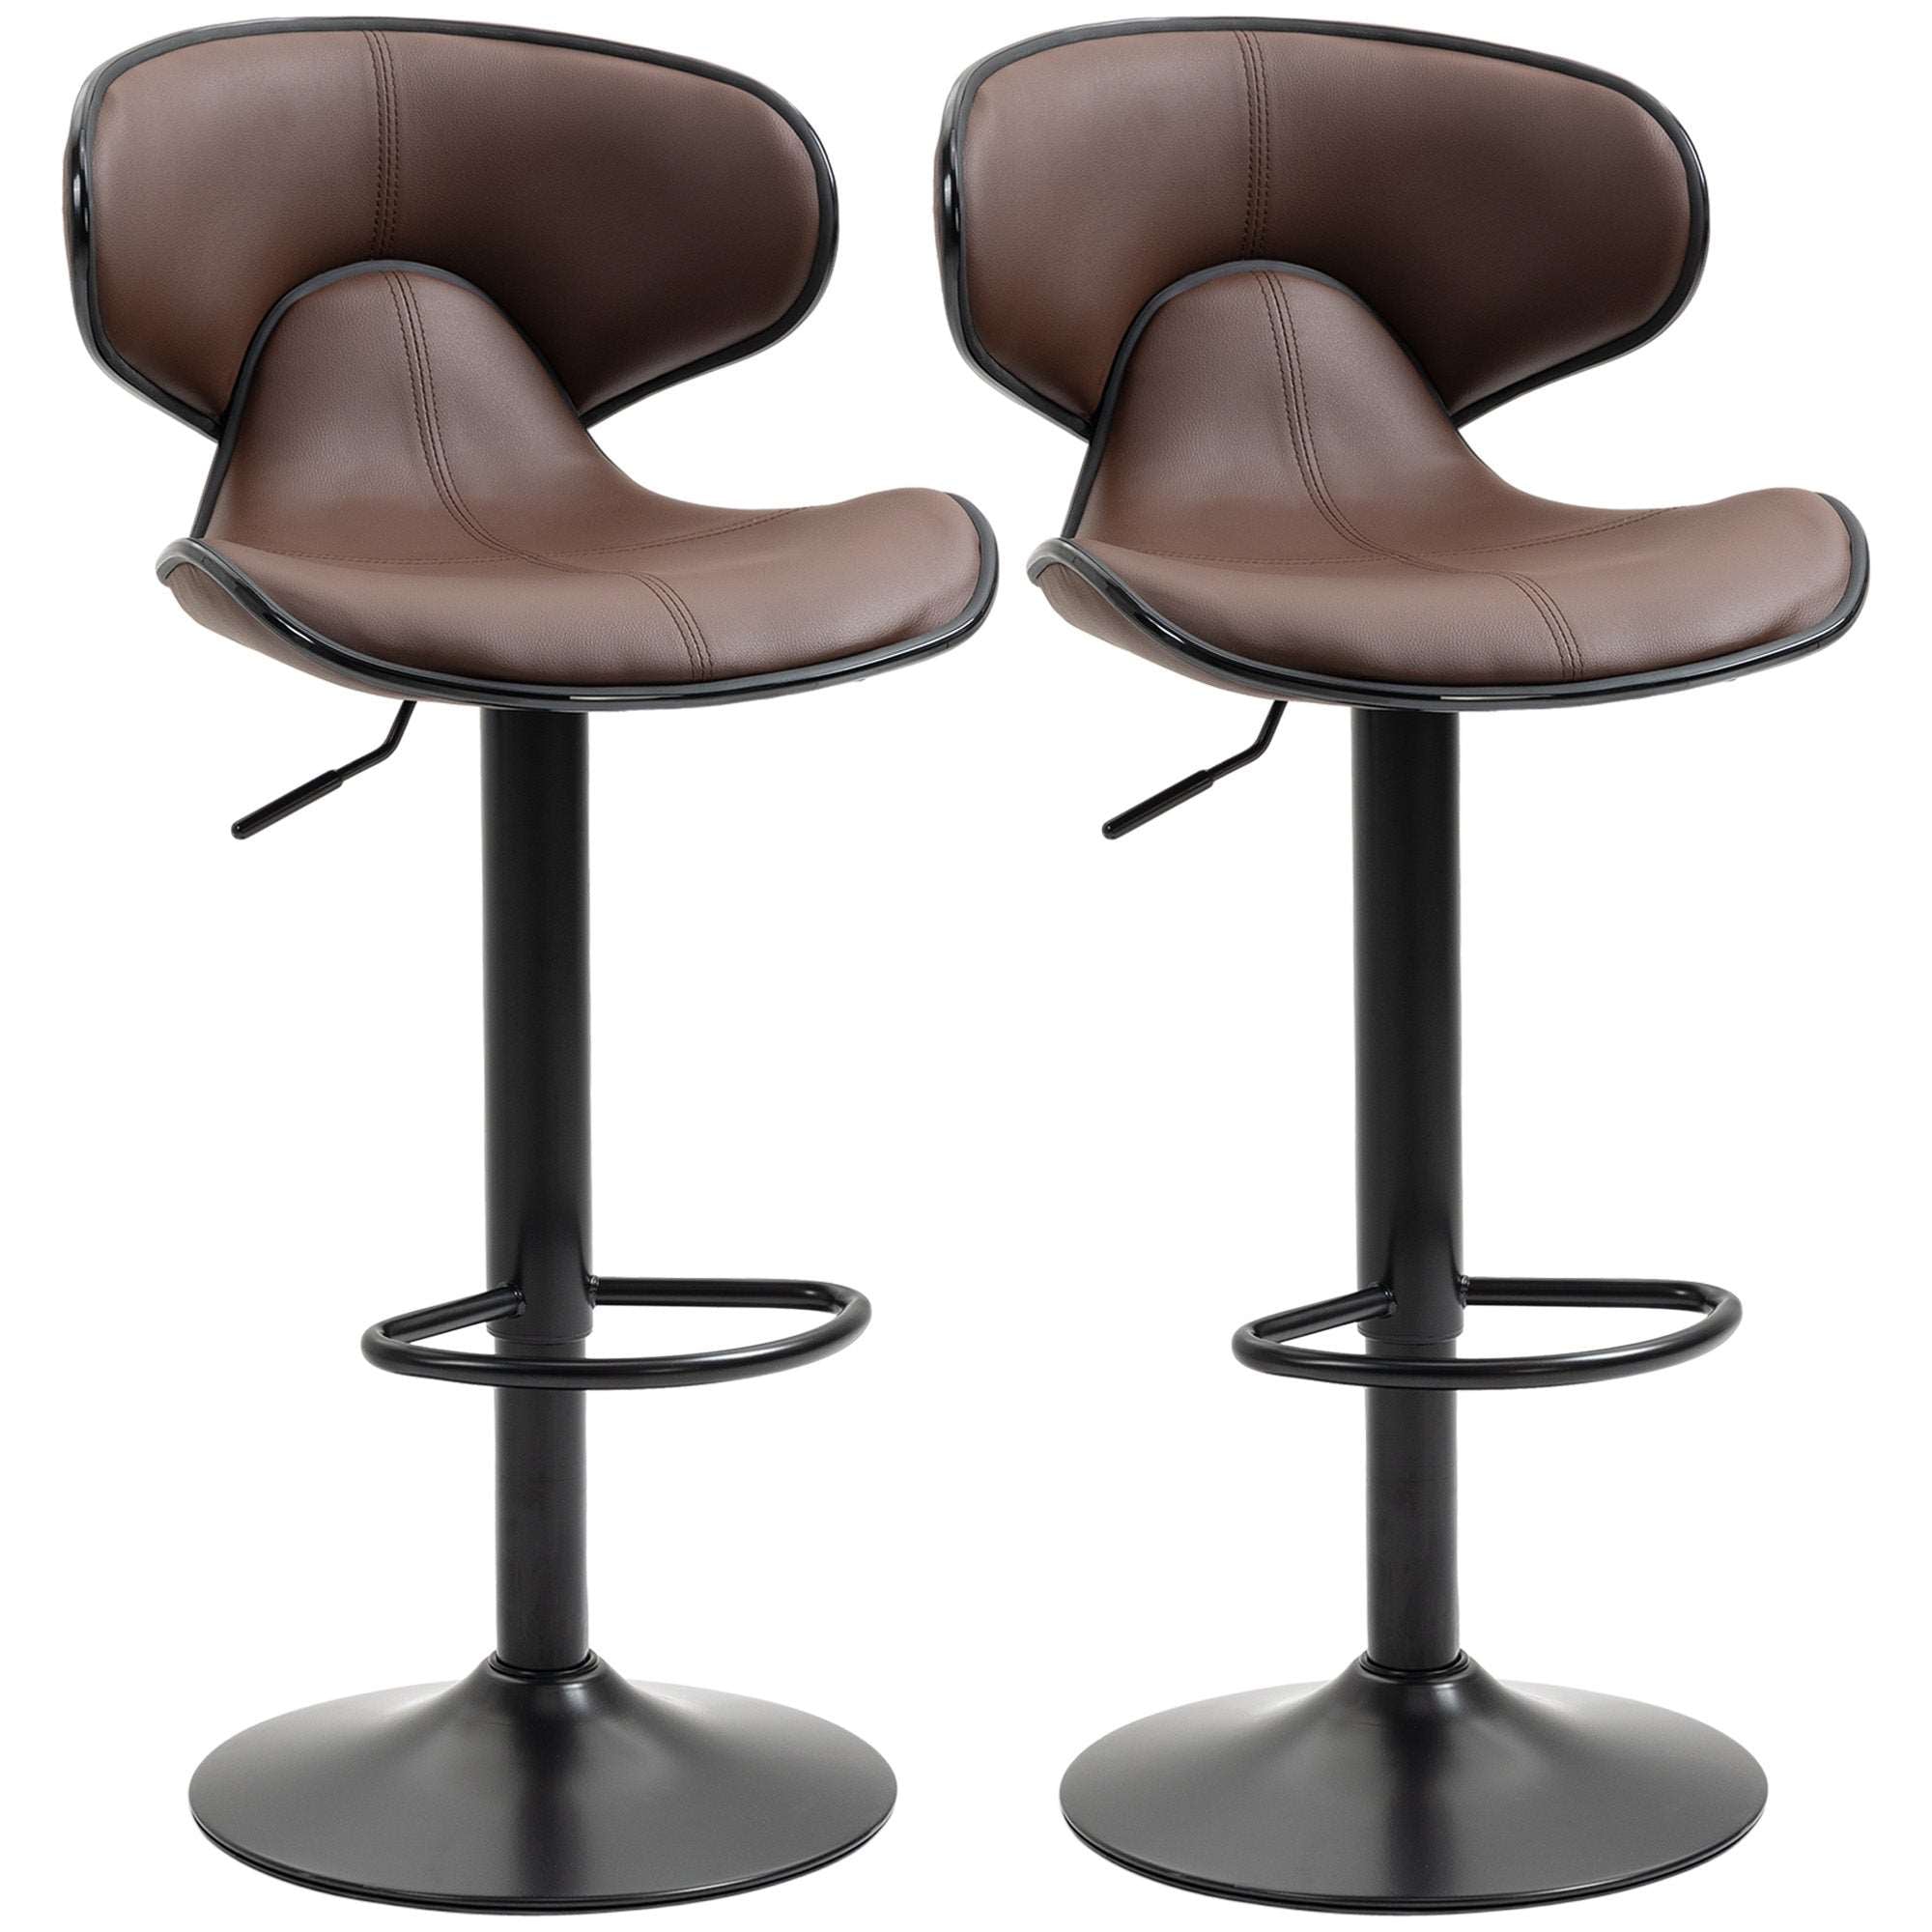 Adjustable Swivel Bar Stools Set of 2, Barstools with Footrest and Backrest, Steel Frame Gas Lift, for Kitchen Counter Dining Room, Brown  AOSOM   